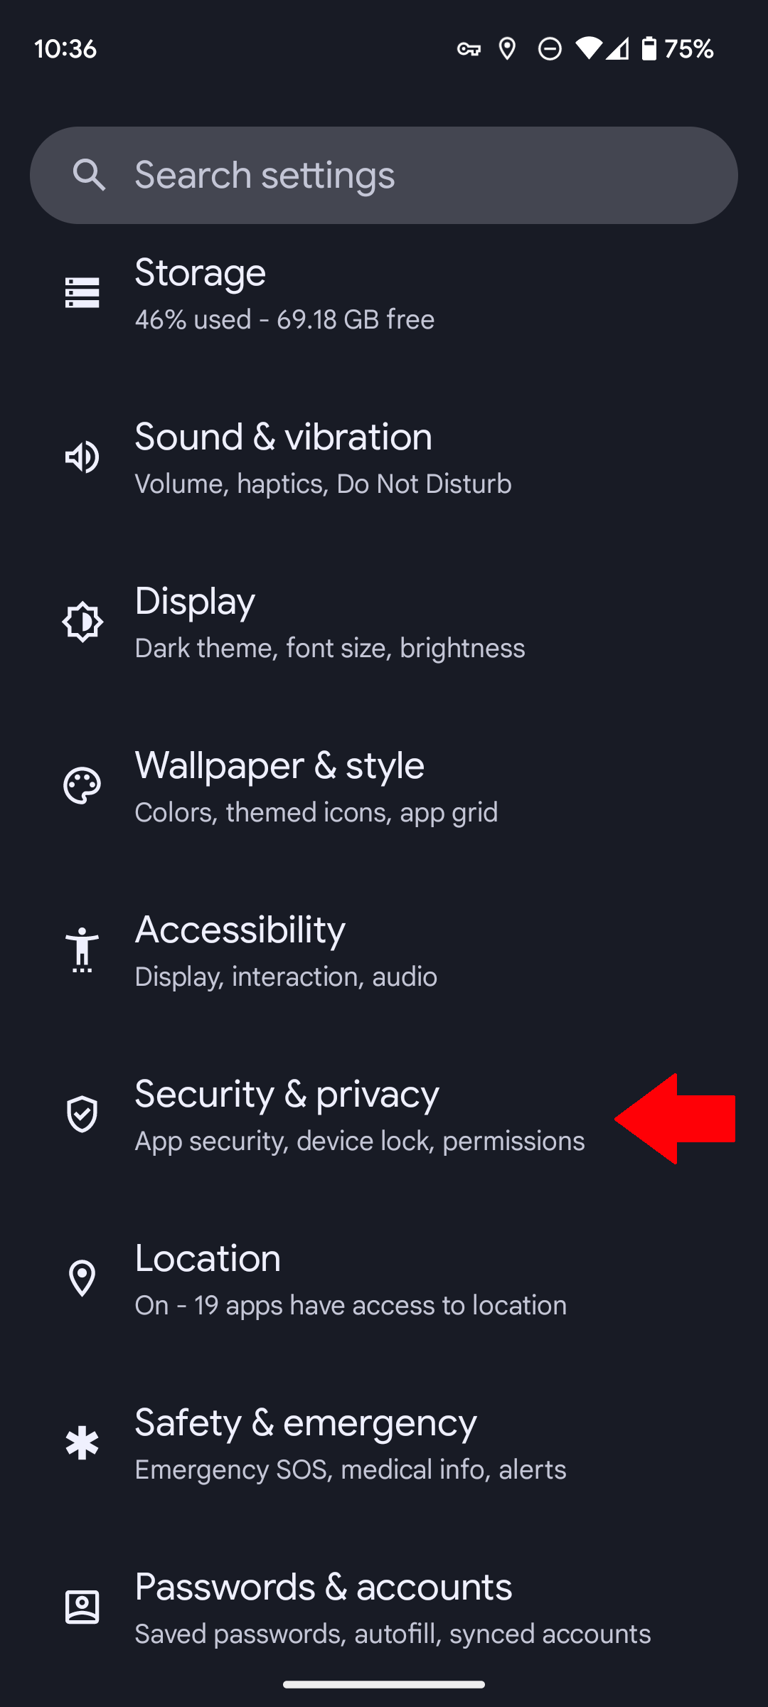 A screenshot of the Settings app on a Google Pixel phone with a red arrow pointing to the Security & Privacy option